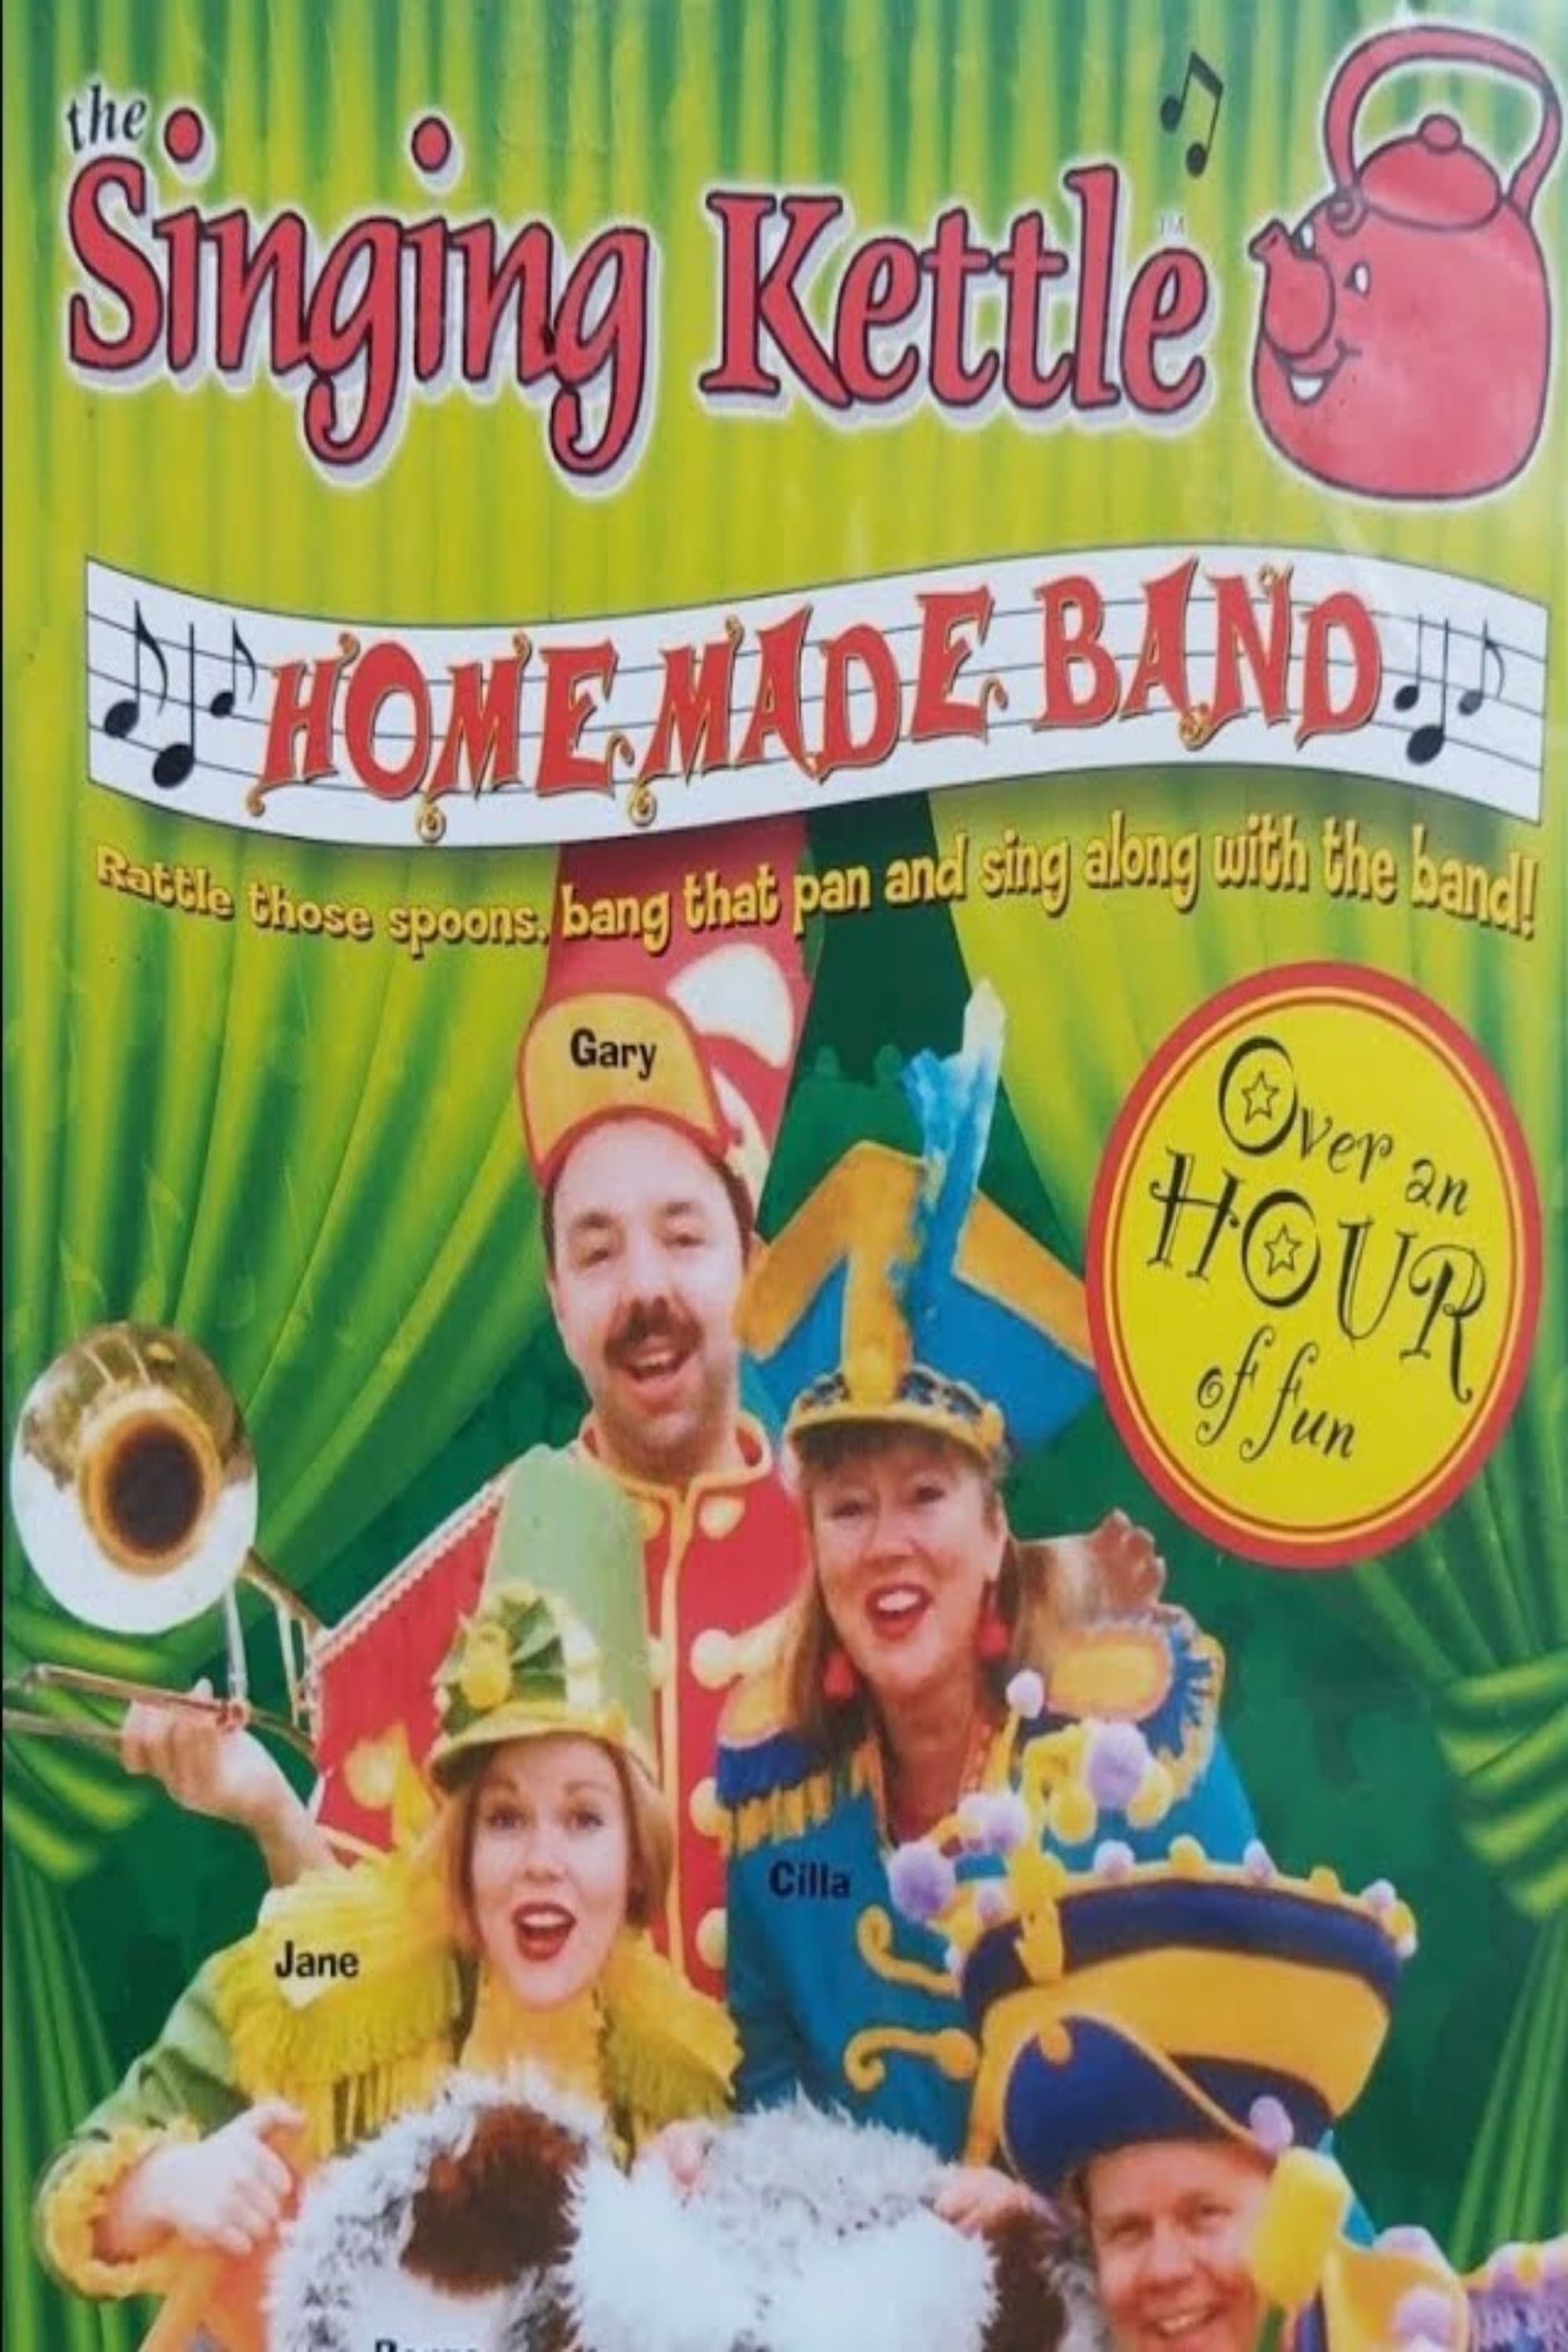 The Singing Kettle - Homemade Band